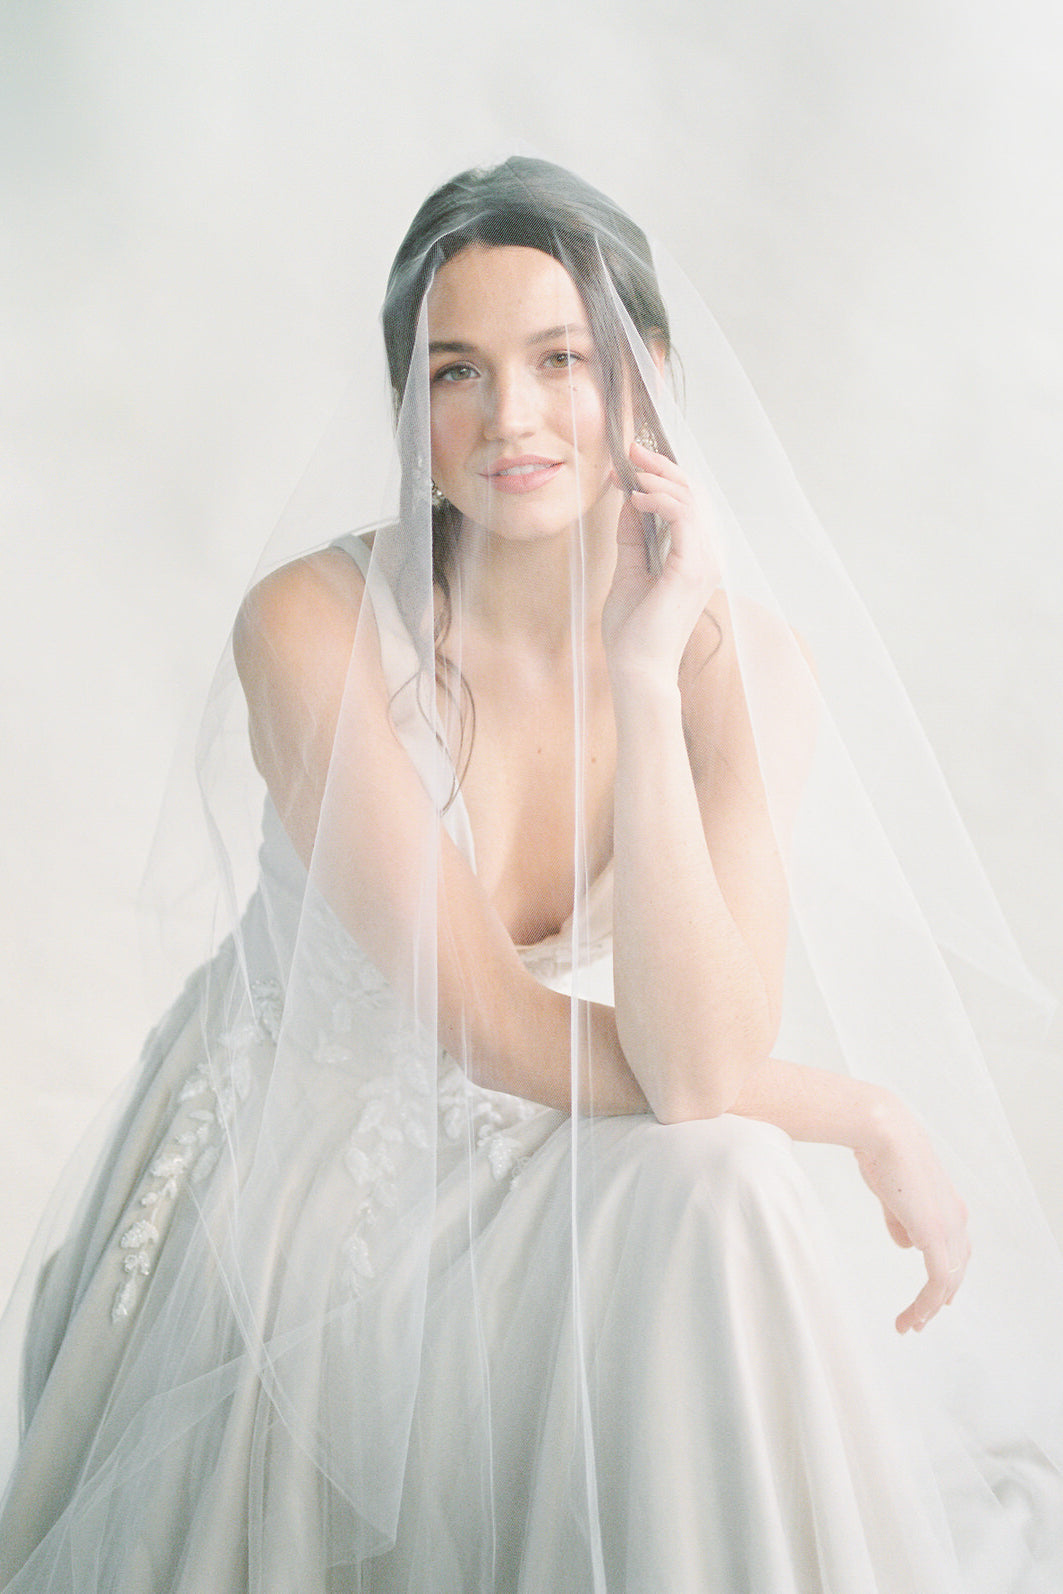 One Blushing Bride Two Tier Drop Wedding Veil, Long Veil with Blusher, Double Layer Blush / Fingertip 35-40 Inches